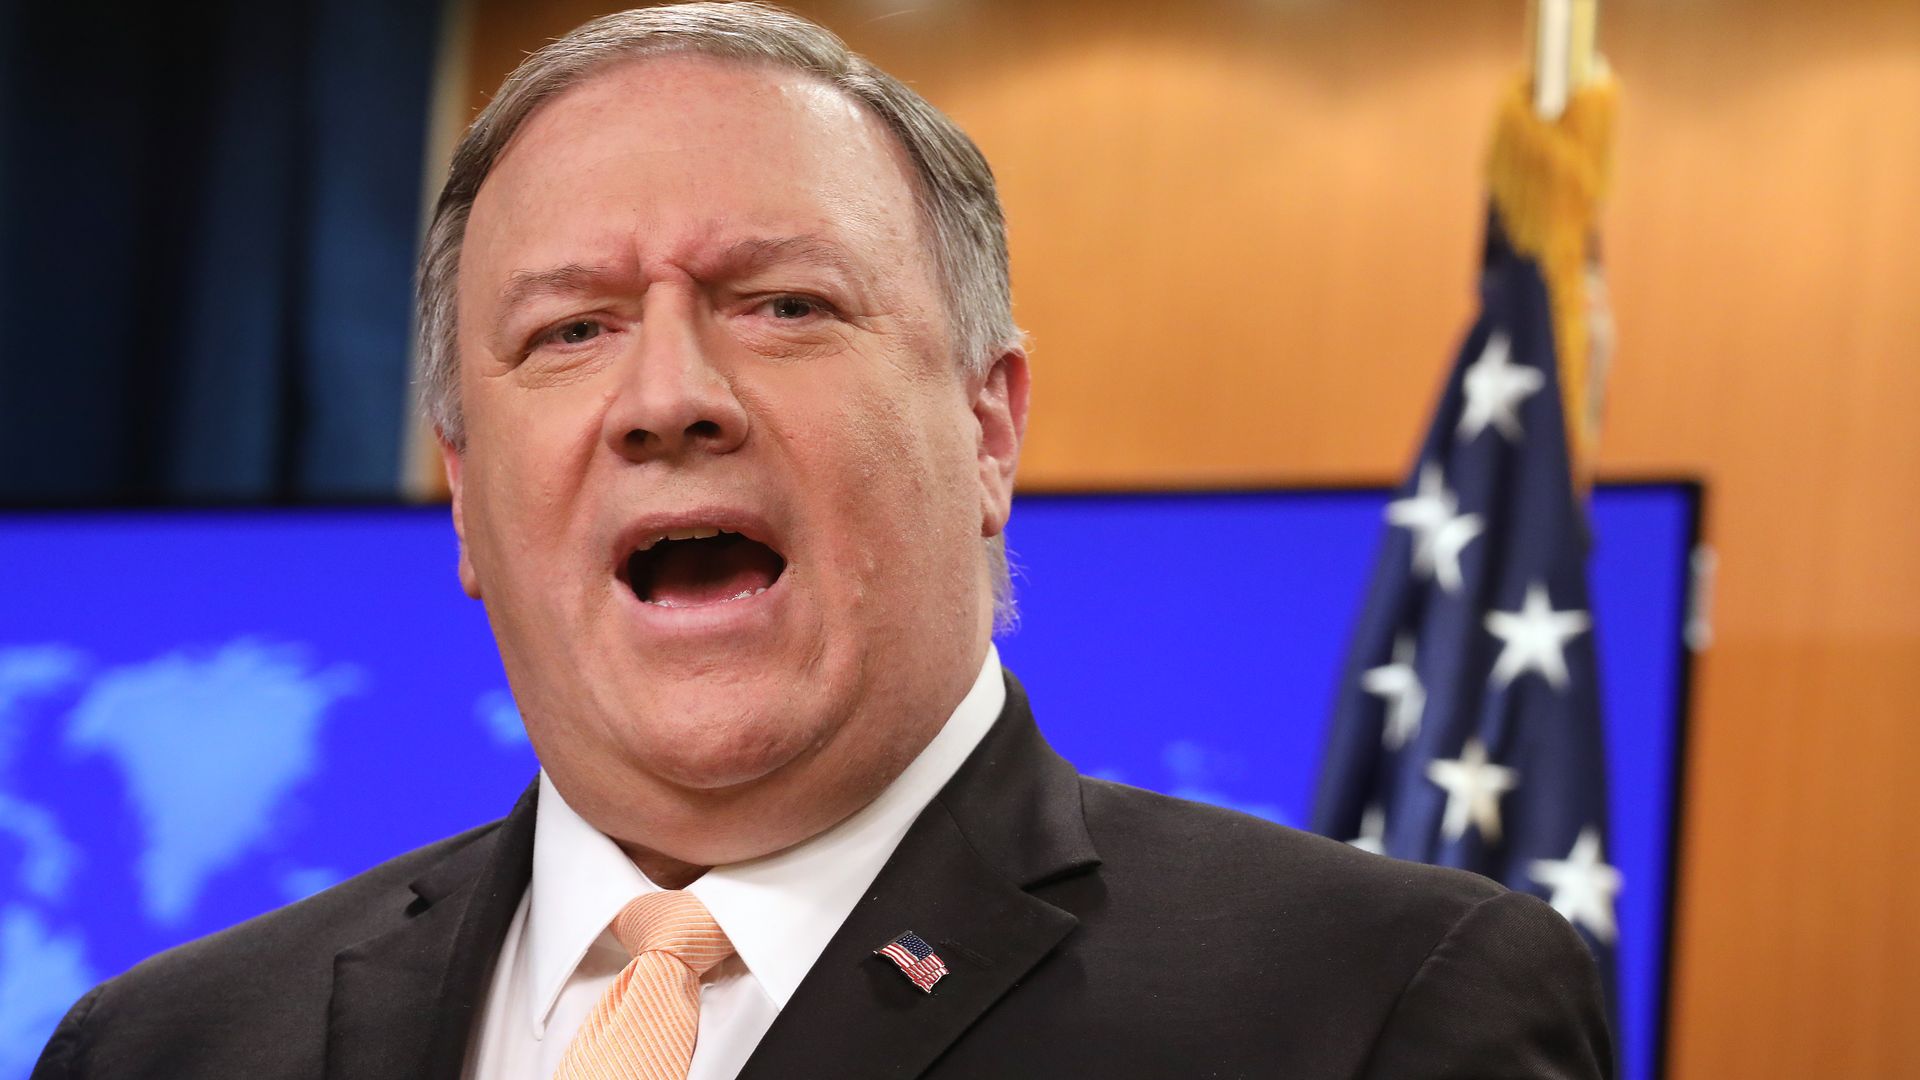 Mike Pompeo says the decision was made in light of the deteriorating situation in Venezuela.